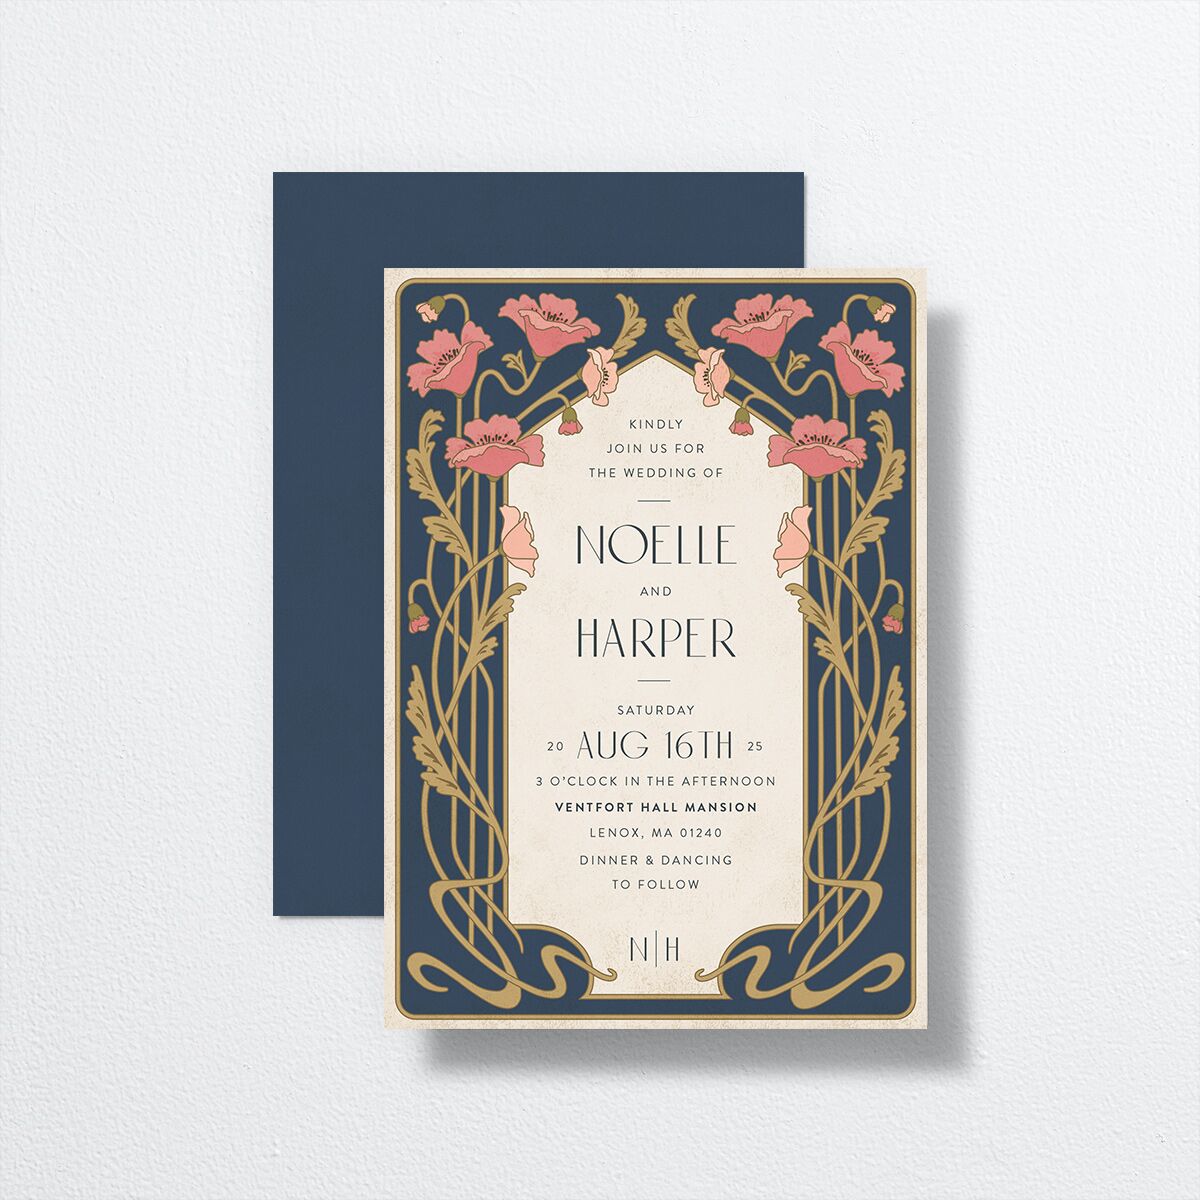 Vintage Nouveau Wedding Invitations front-and-back in blue